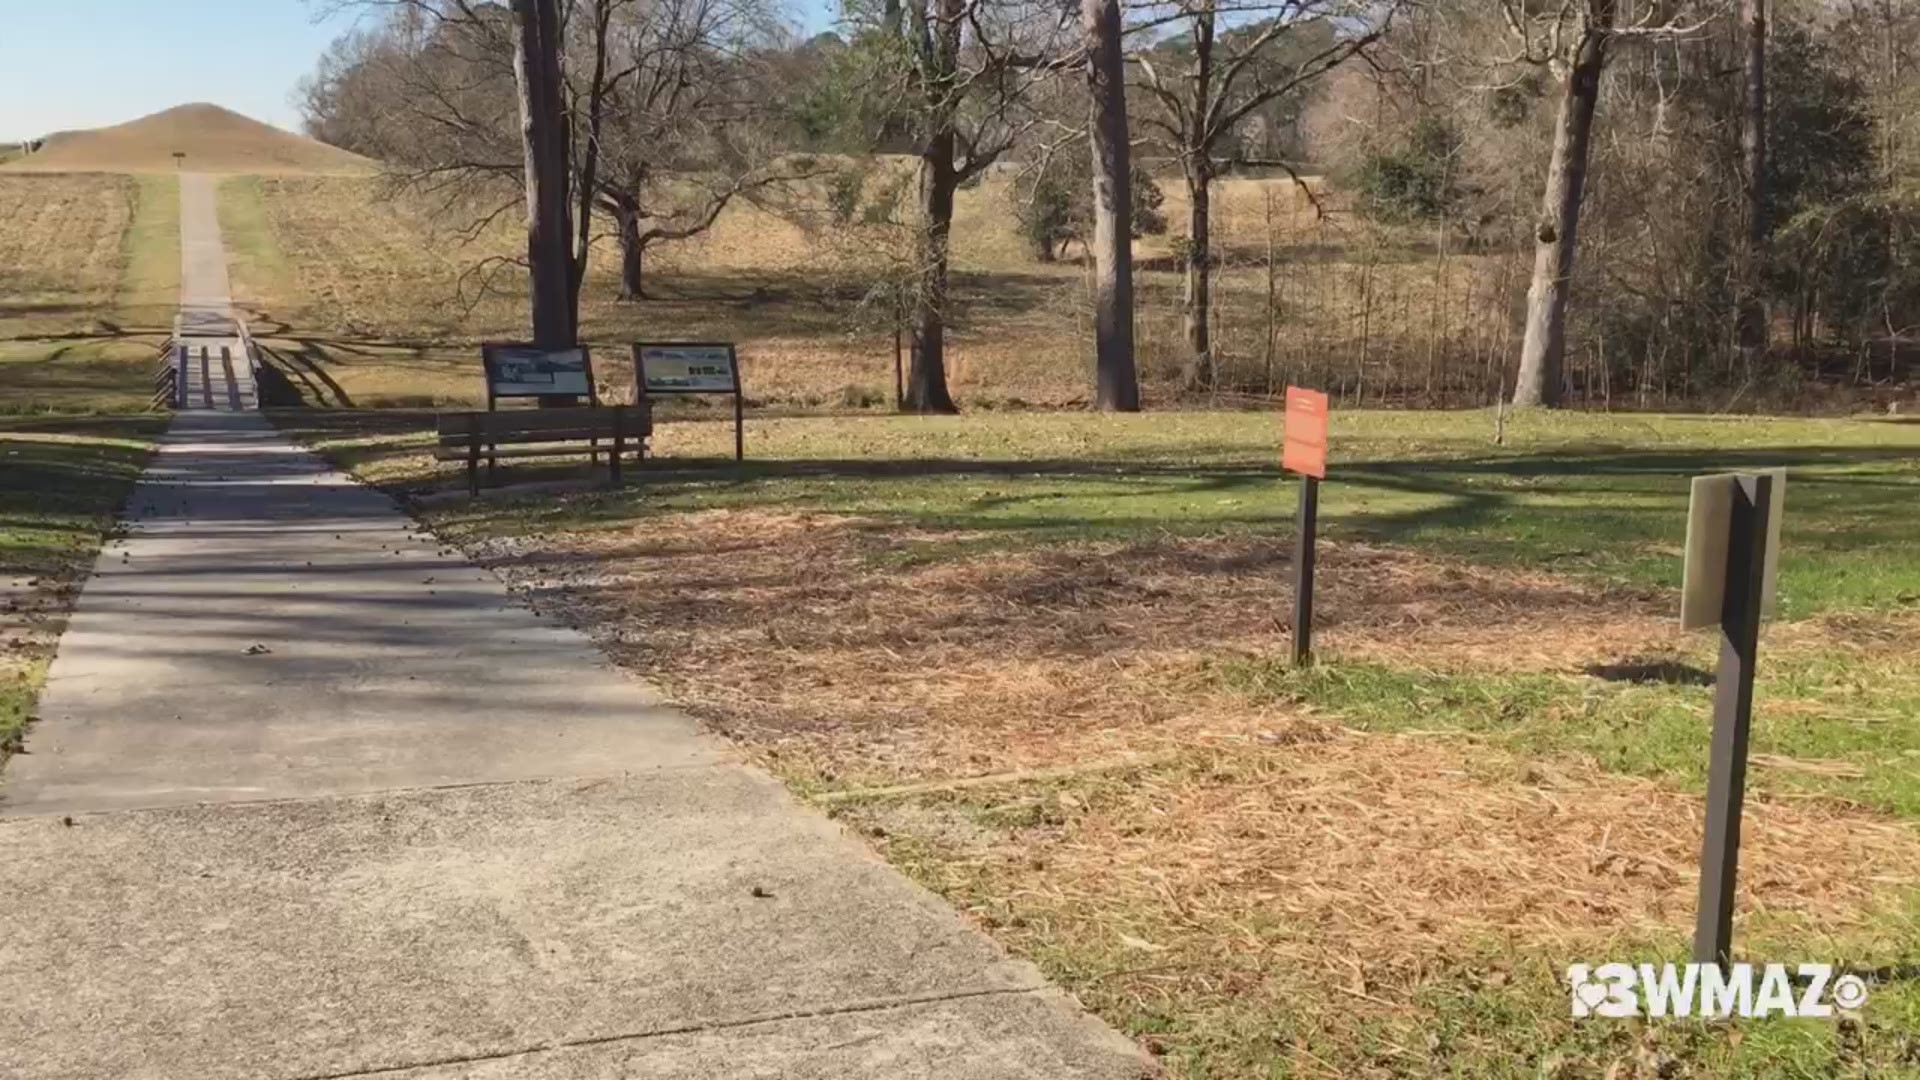 Weeks after the Woodland-style house outside of the visitor's center at the Ocmulgee National Monument was destroyed by vandals, the remains were removed leaving just a sign